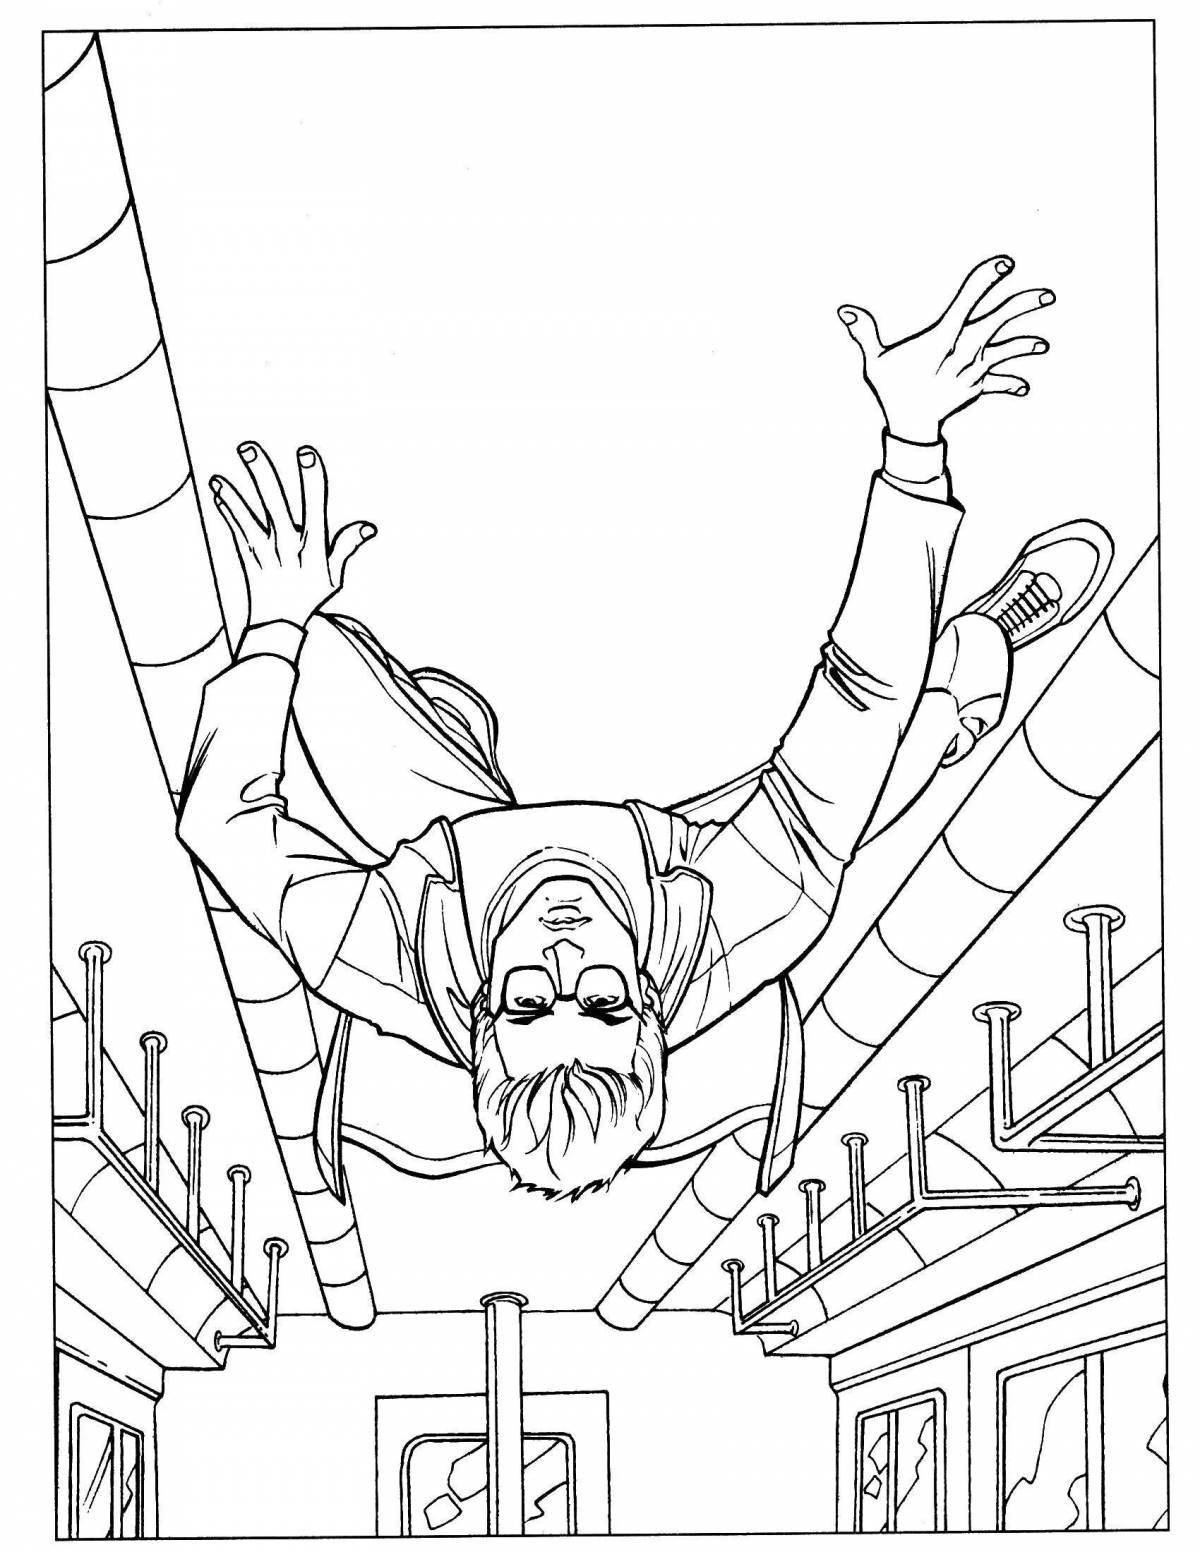 Attractive peter parker coloring page